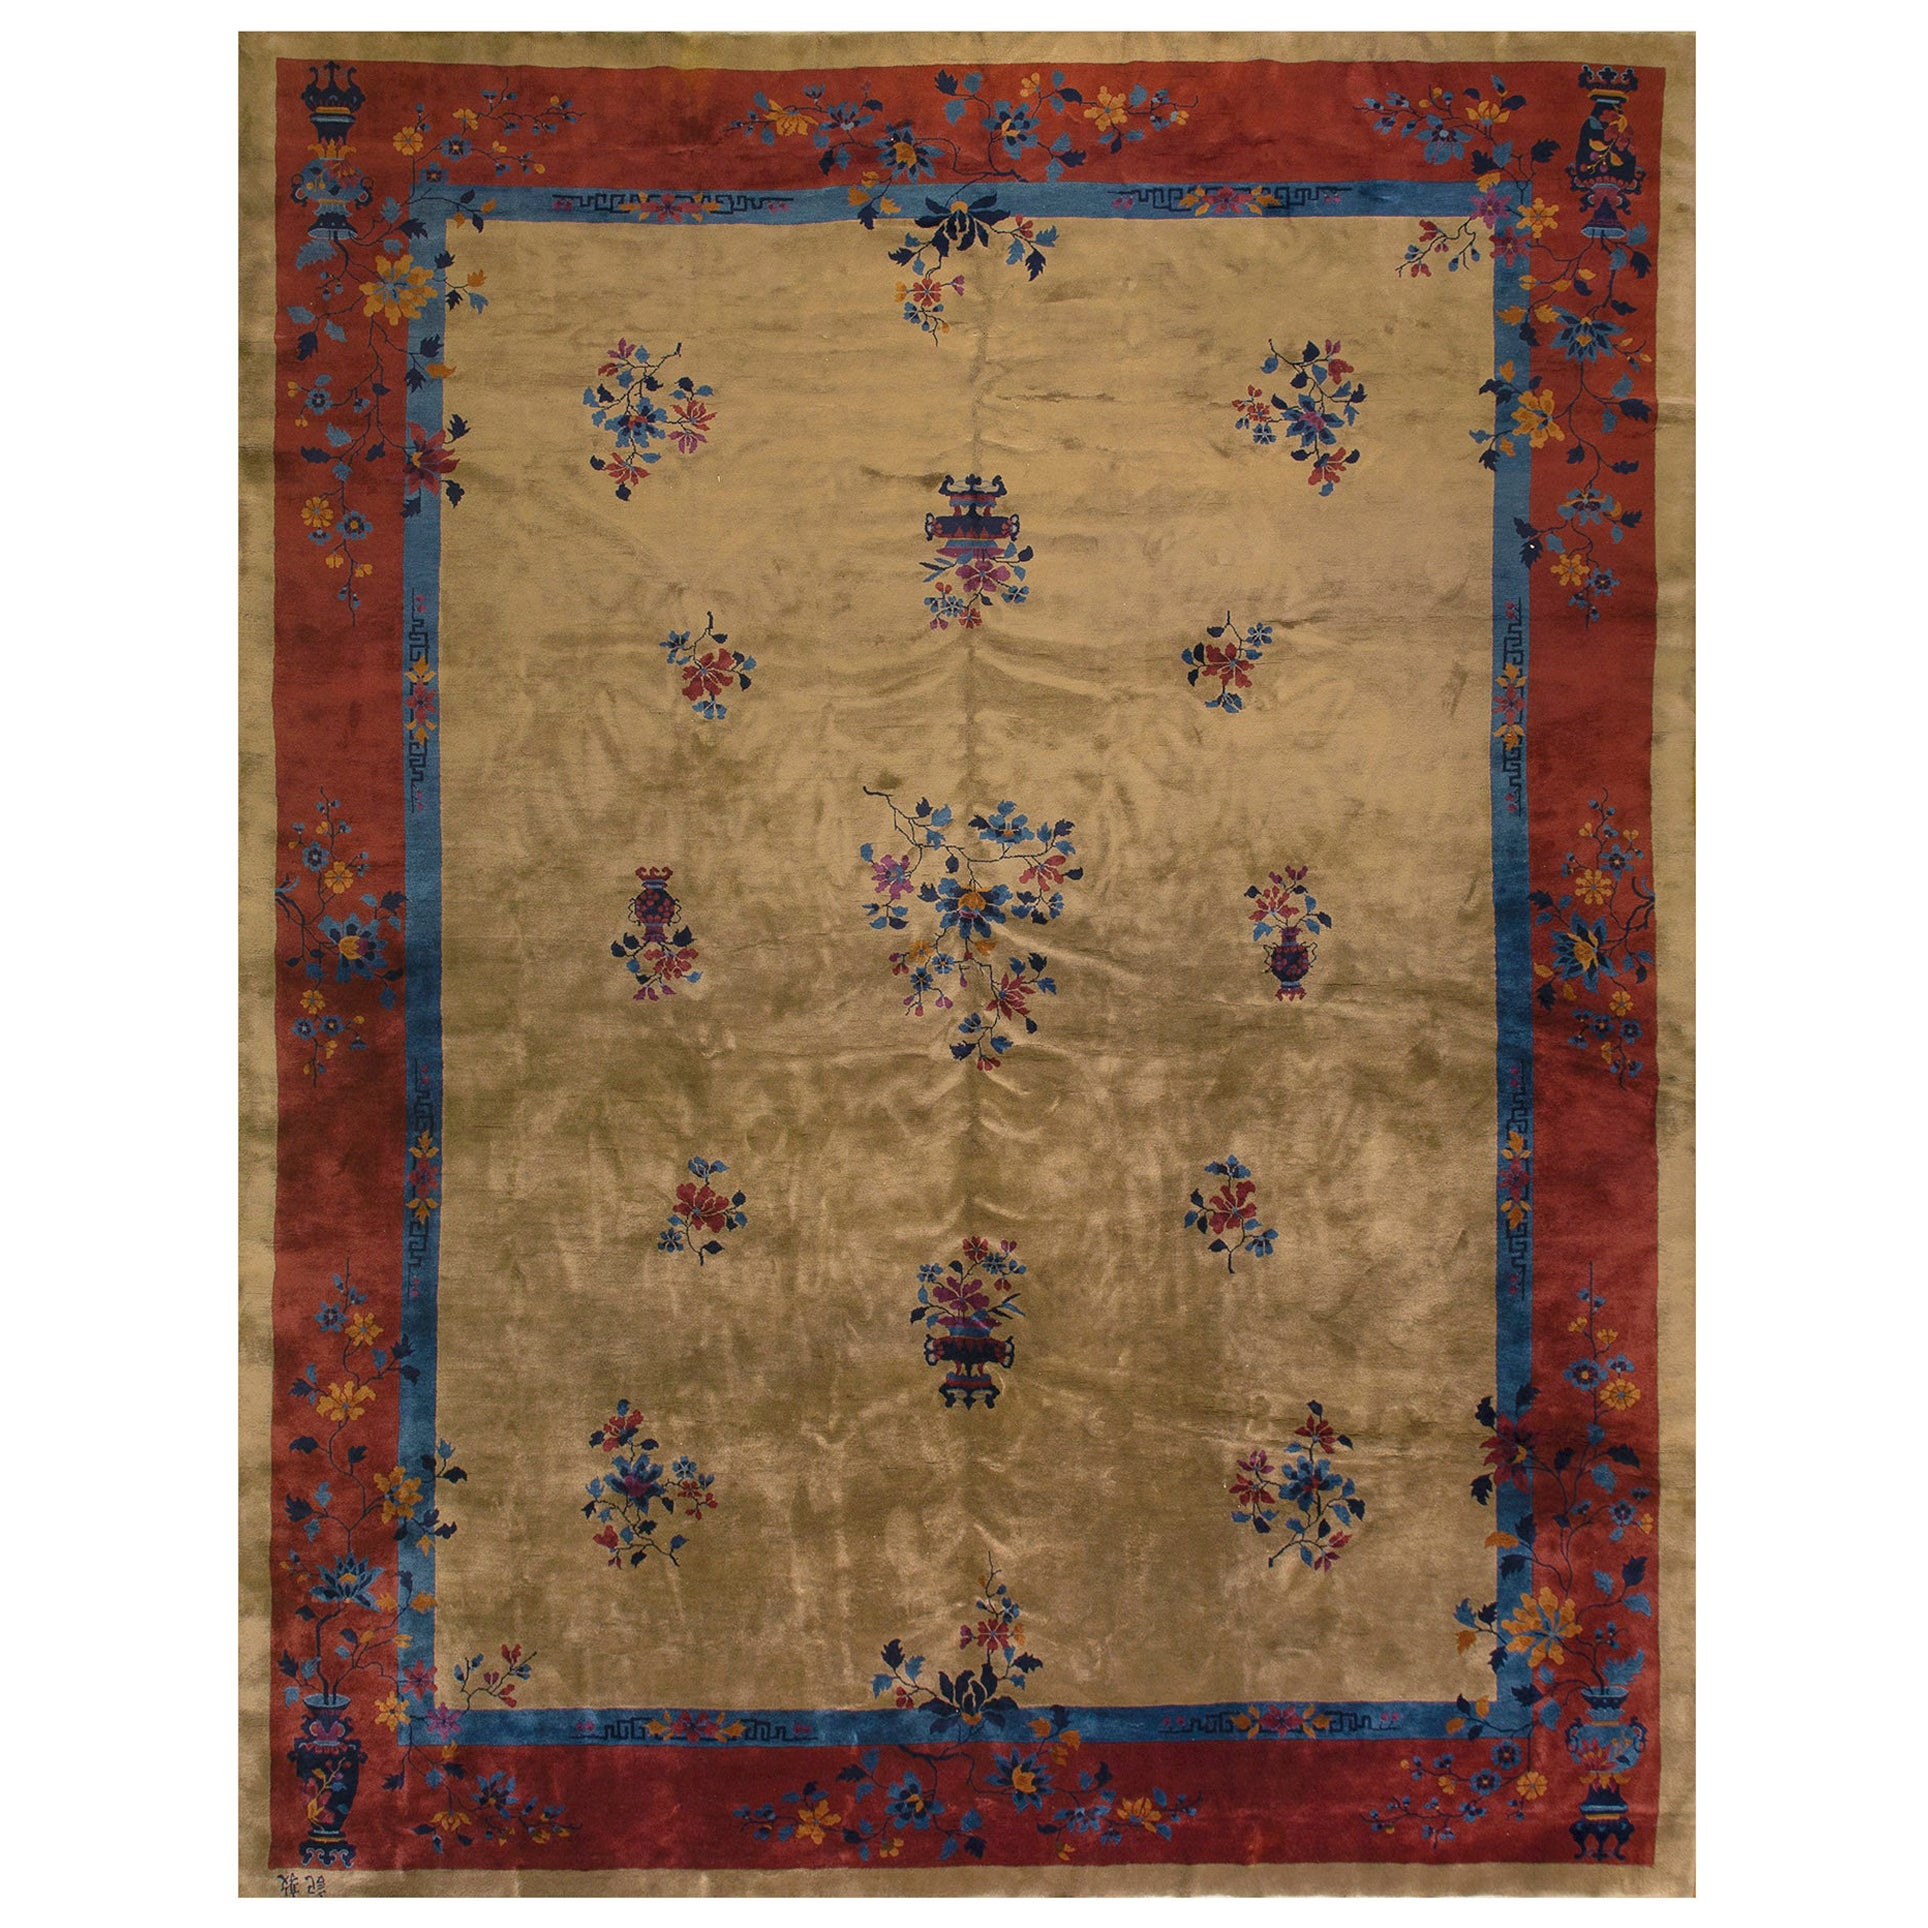 Early 20th Century Chinese Manchester Quality Peking Carpet ( 12' x 15'6" ) For Sale